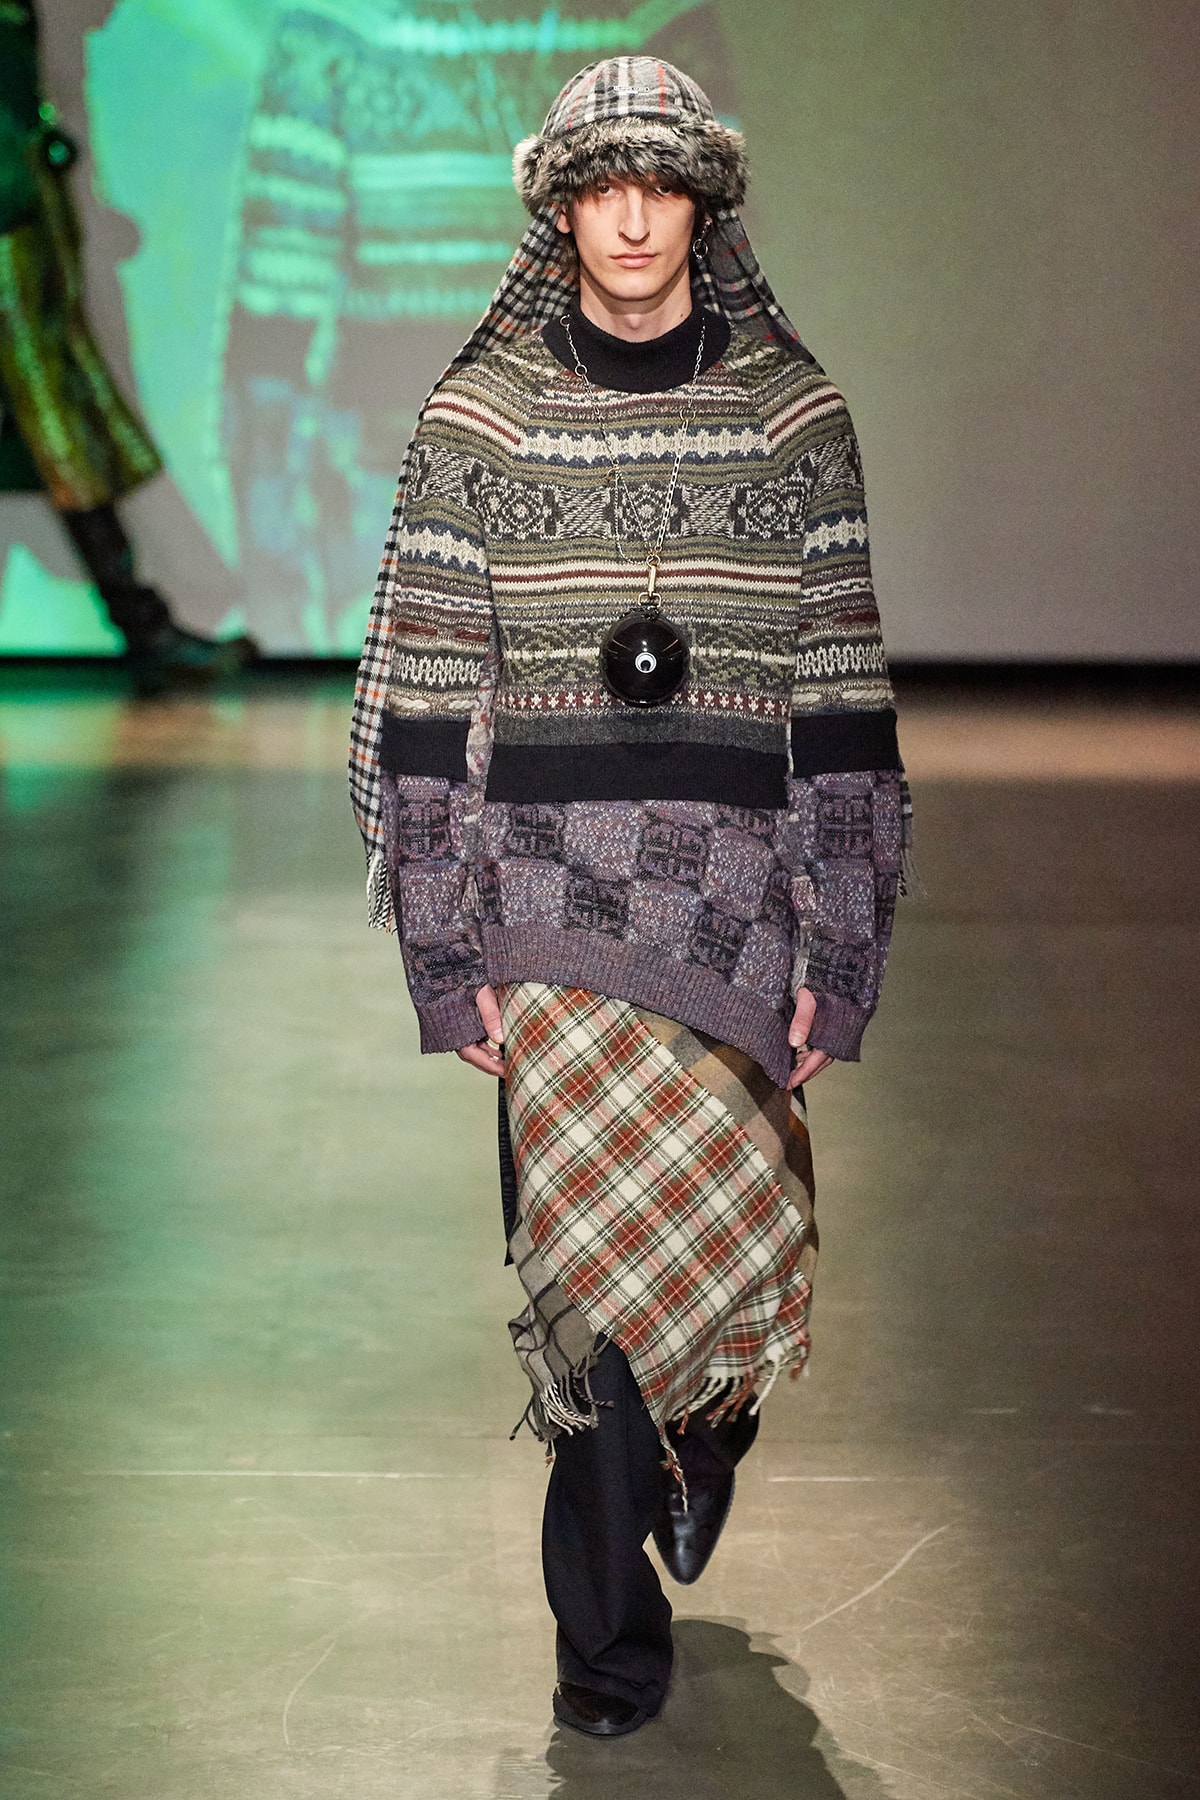 Marine Serre Fall/Winter 2020 Collection Runway Show Knit Sweater Plaid Skirt